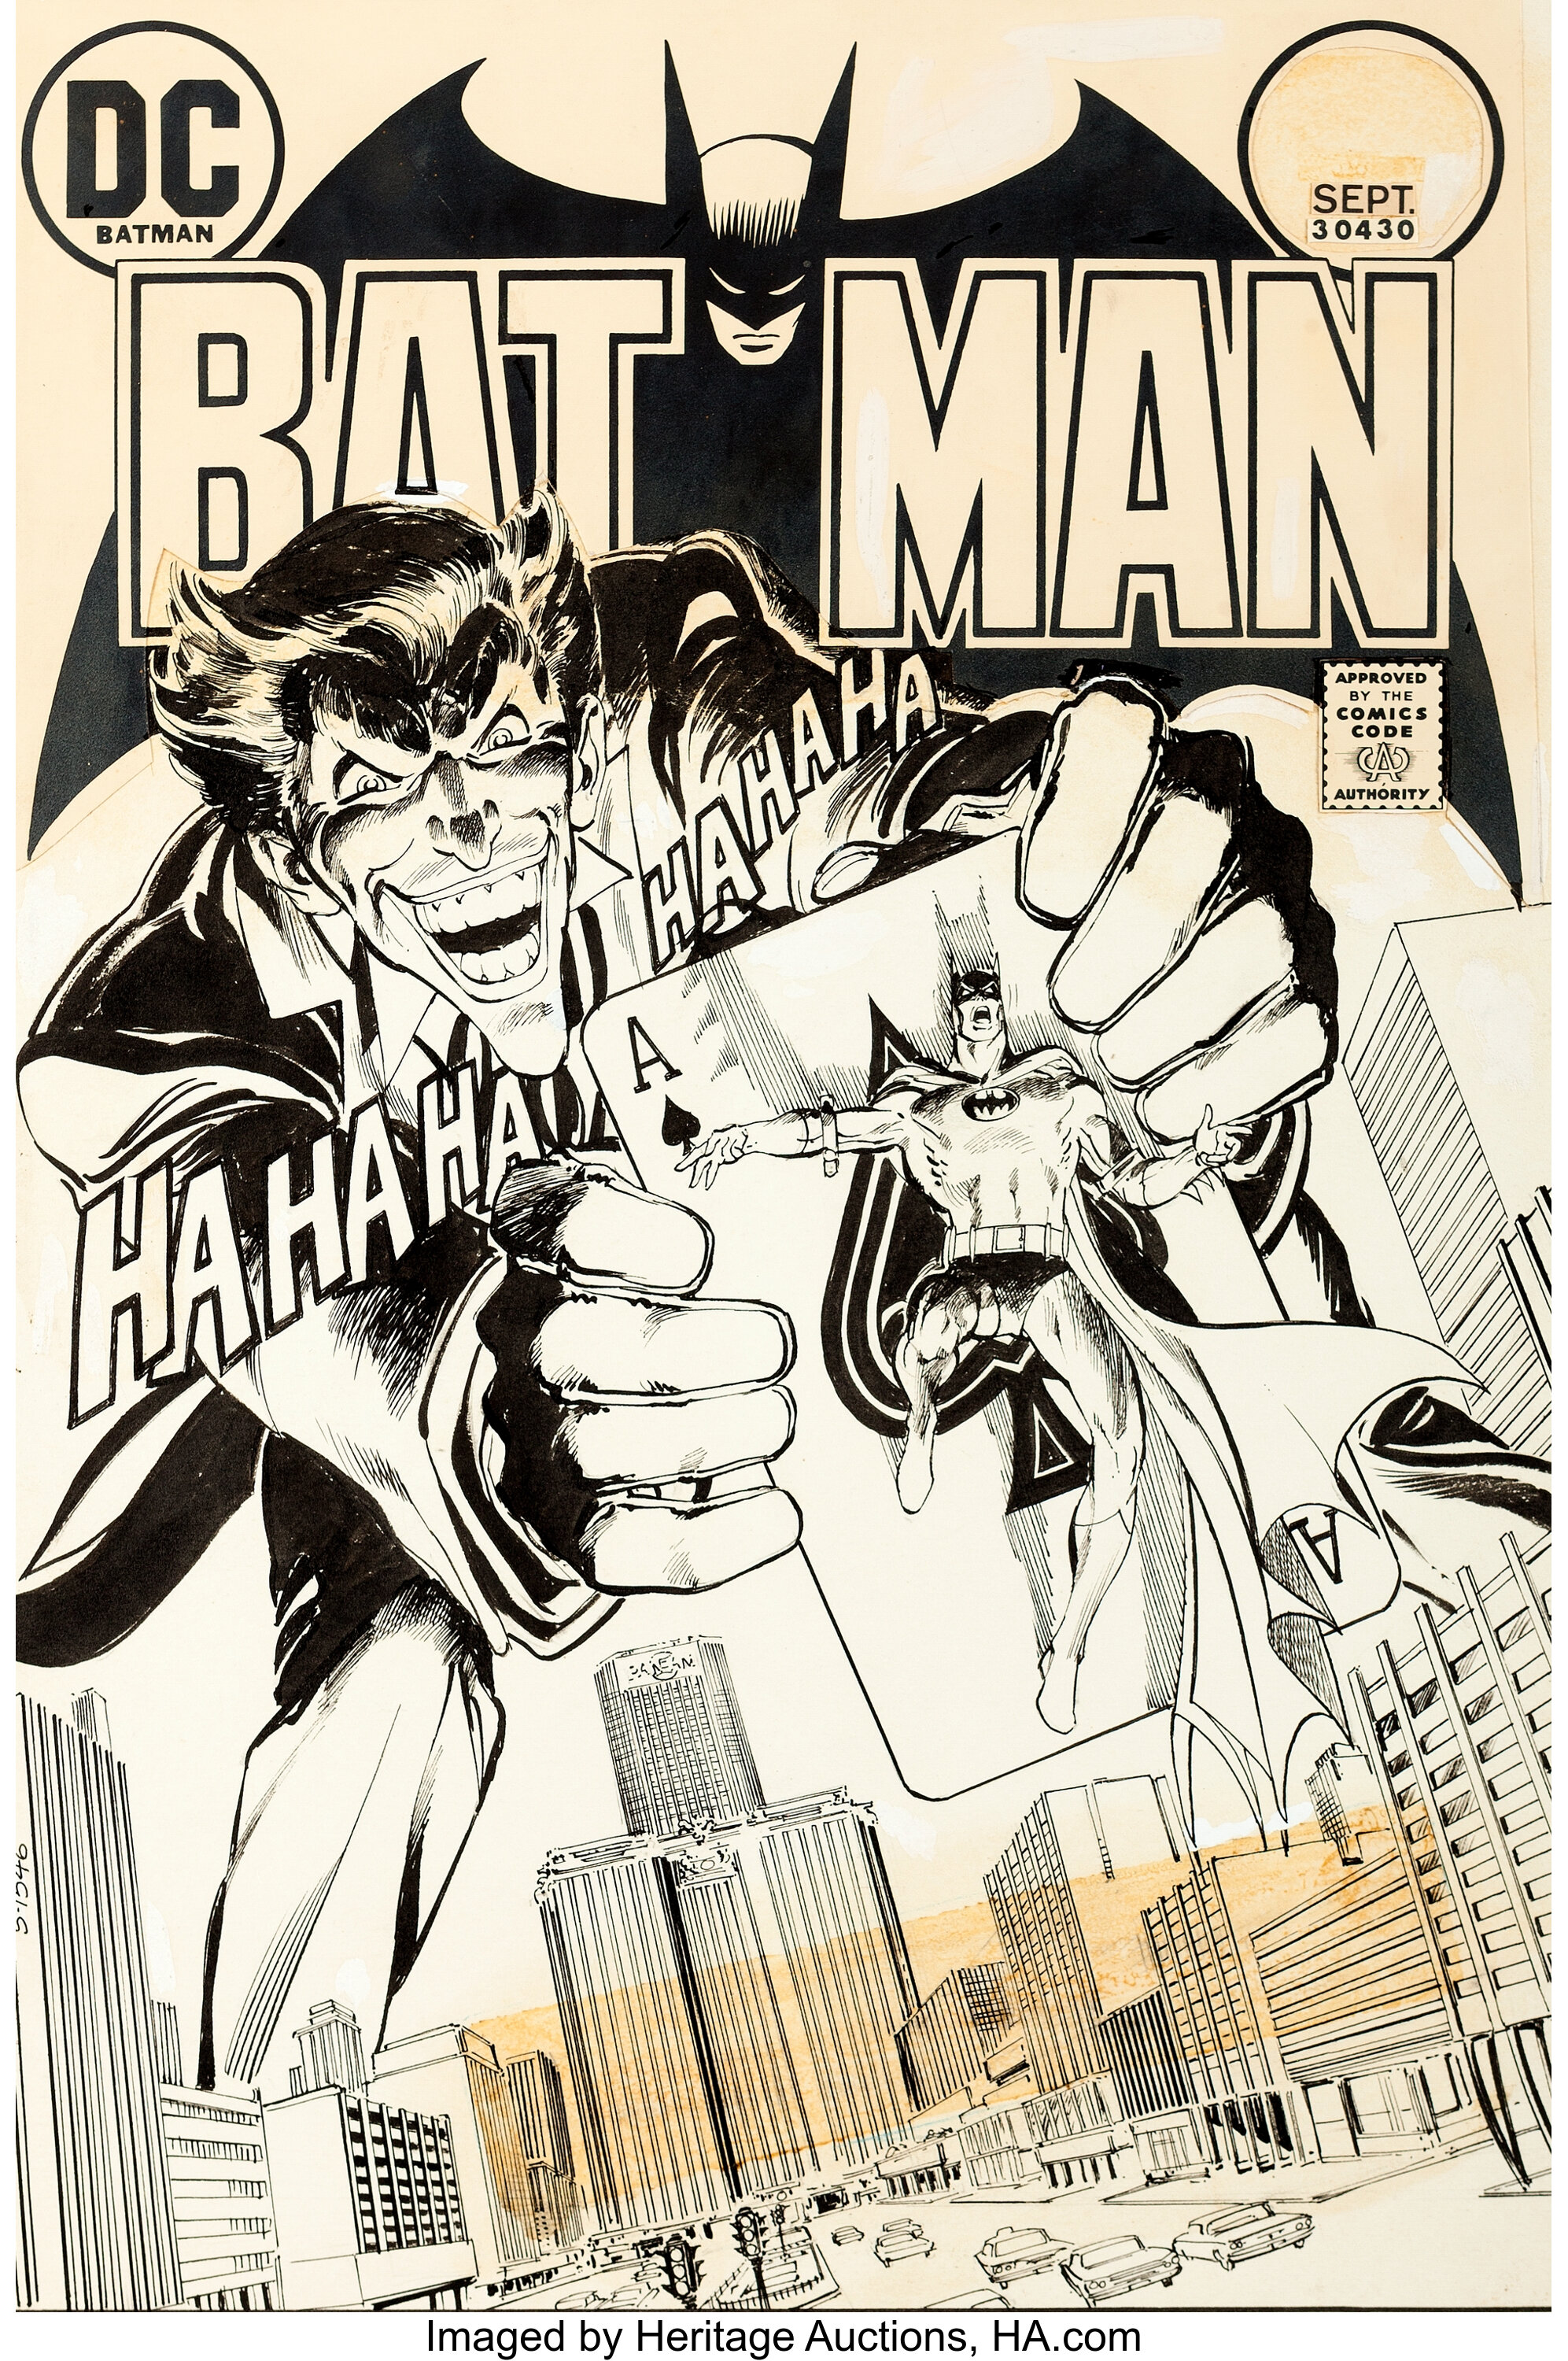 Neal Adams Comic Book Art for Sale | Value Guide | Heritage Auctions